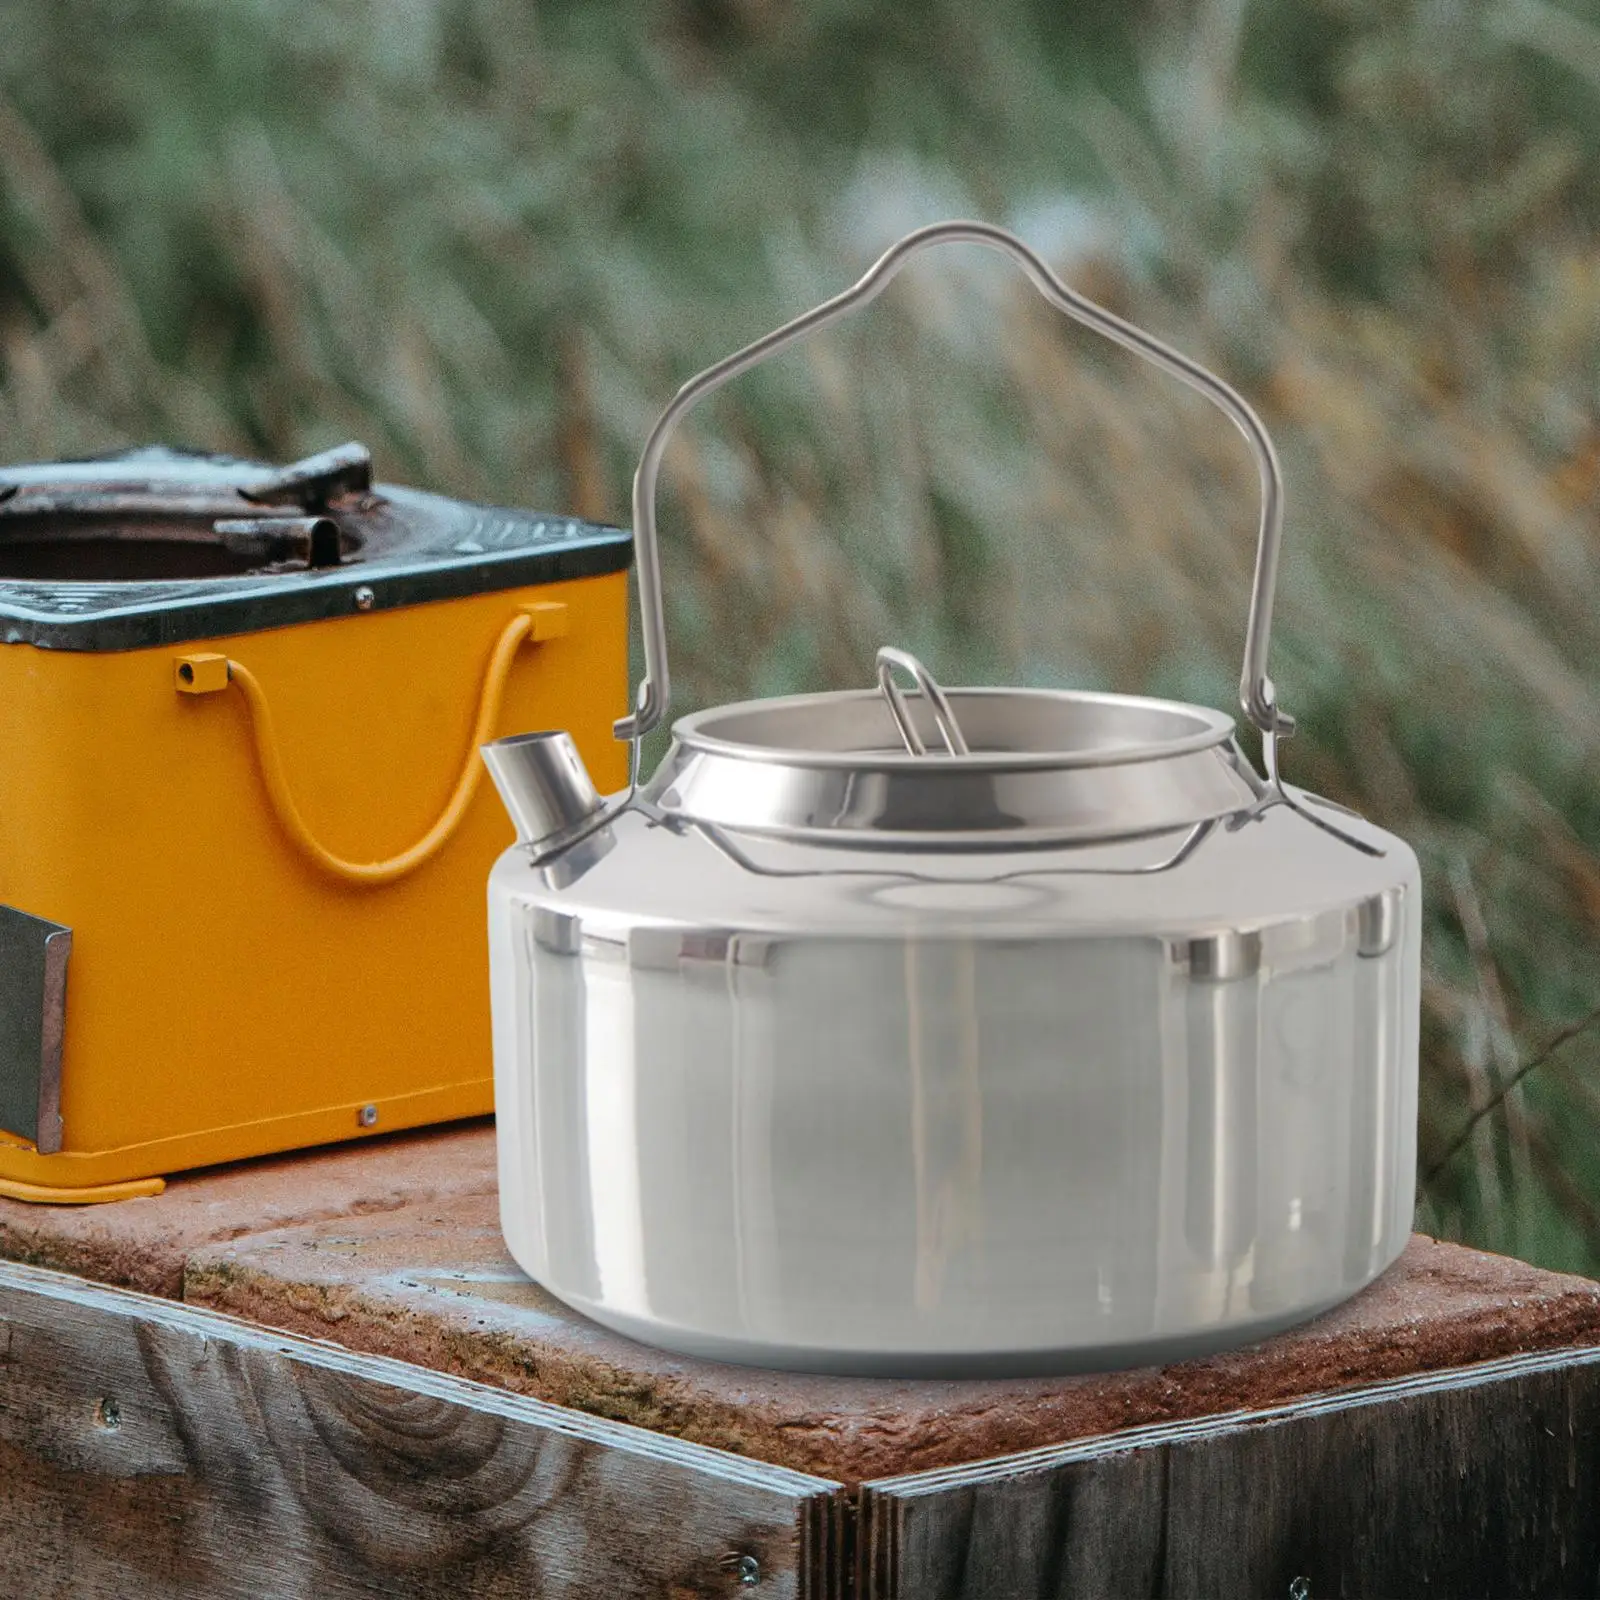 Outdoor Camping Kettle Durable Pot Ultralight 1.3L Stainless Steel for Campfire Hiking